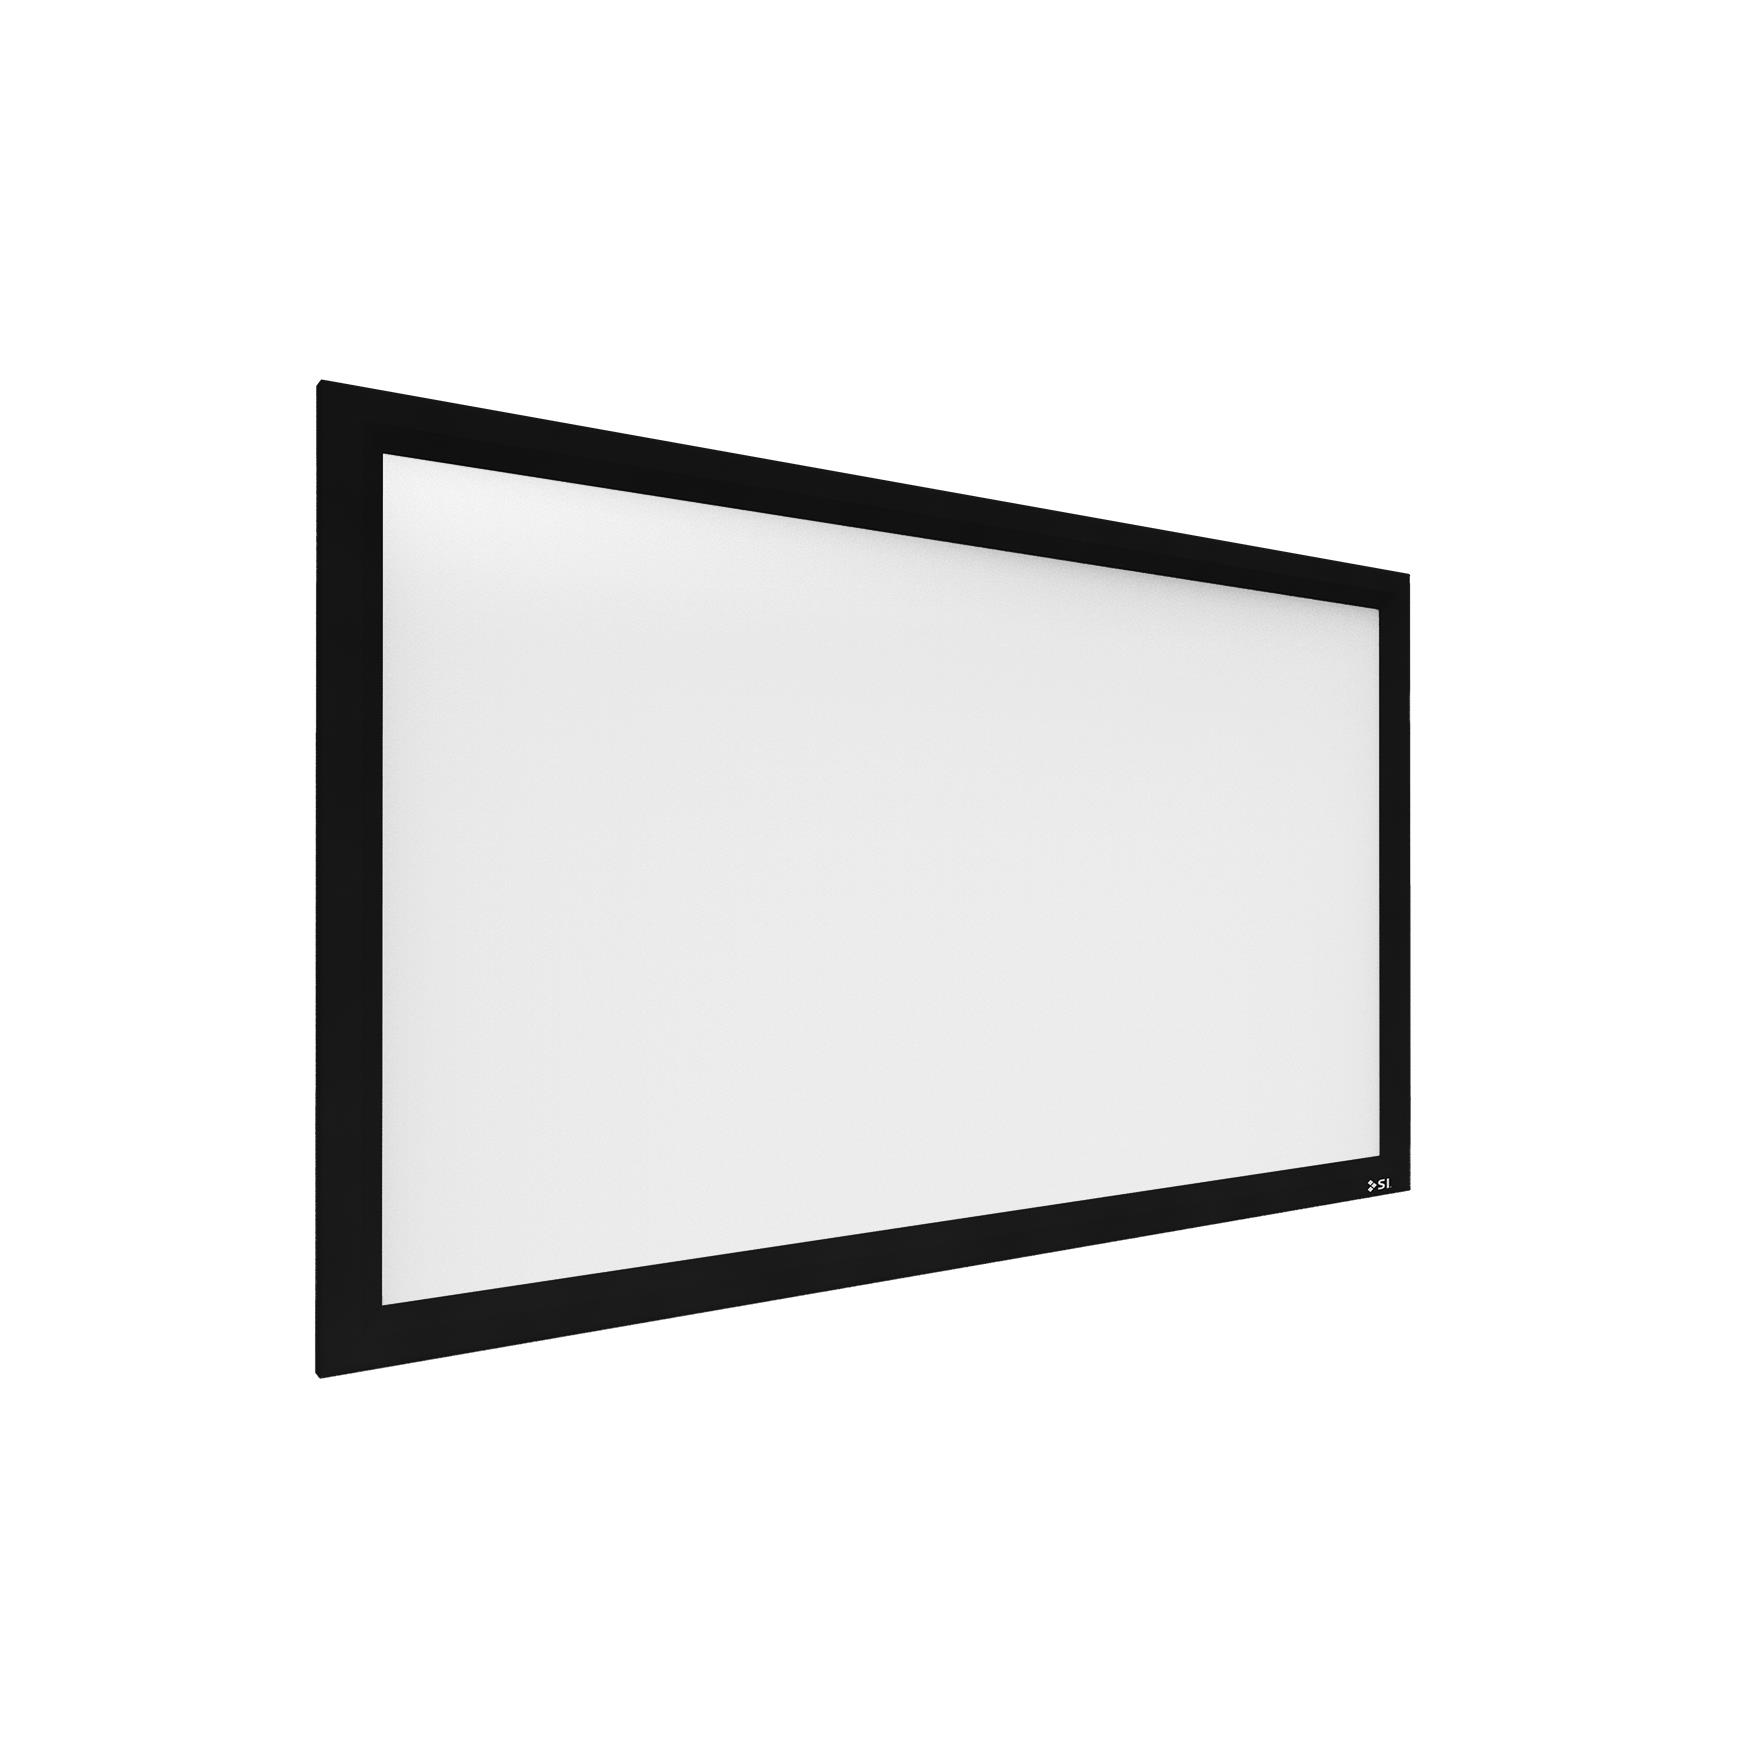 Screen Innovations 3 Series Fixed - 80